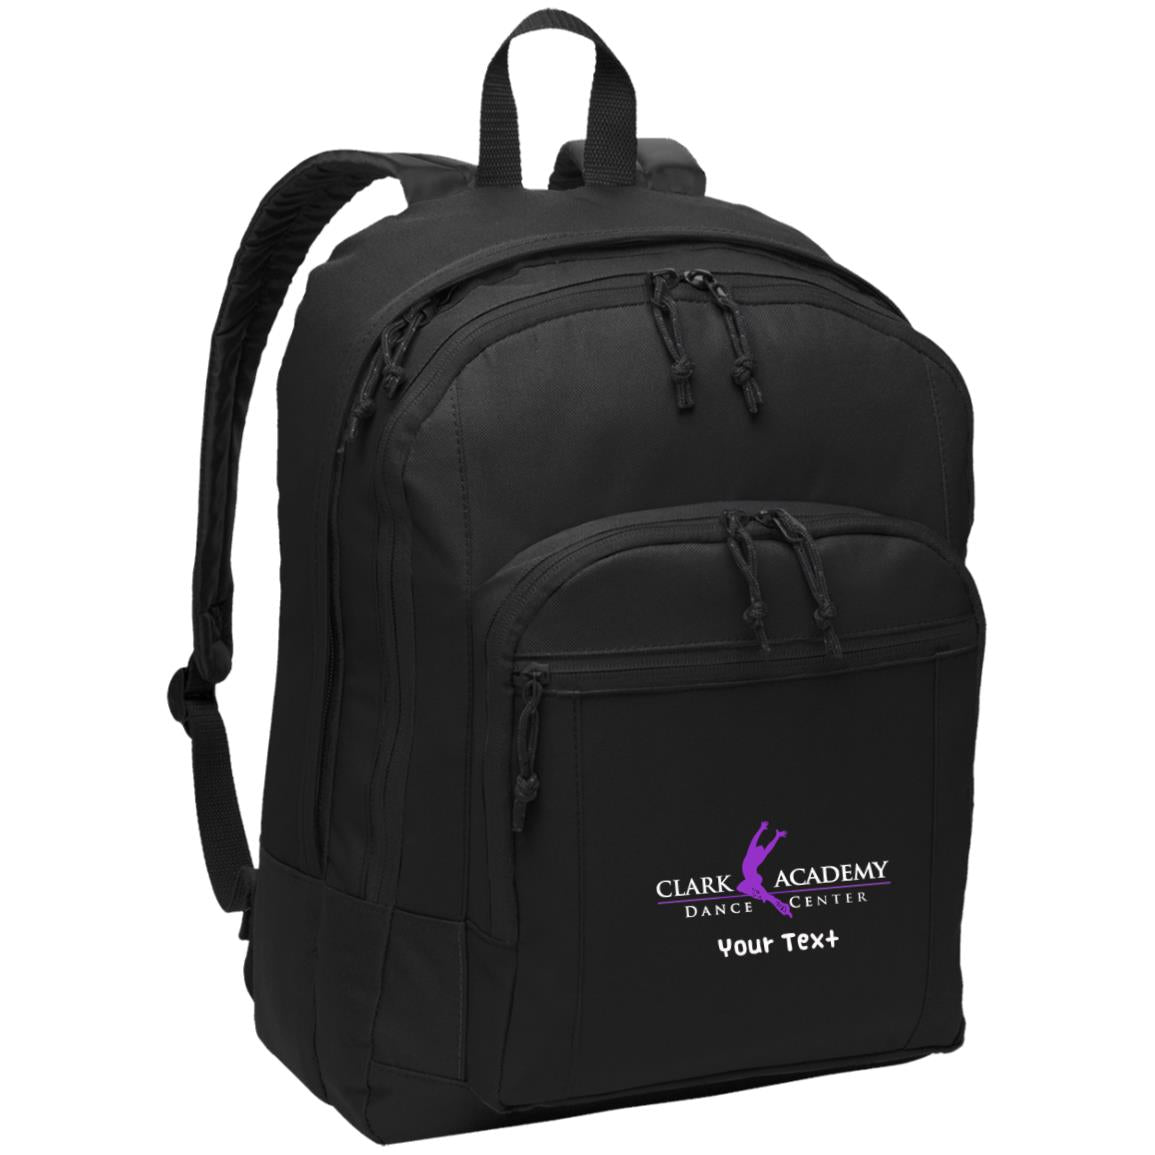 CADC Backpack - Free Personalization